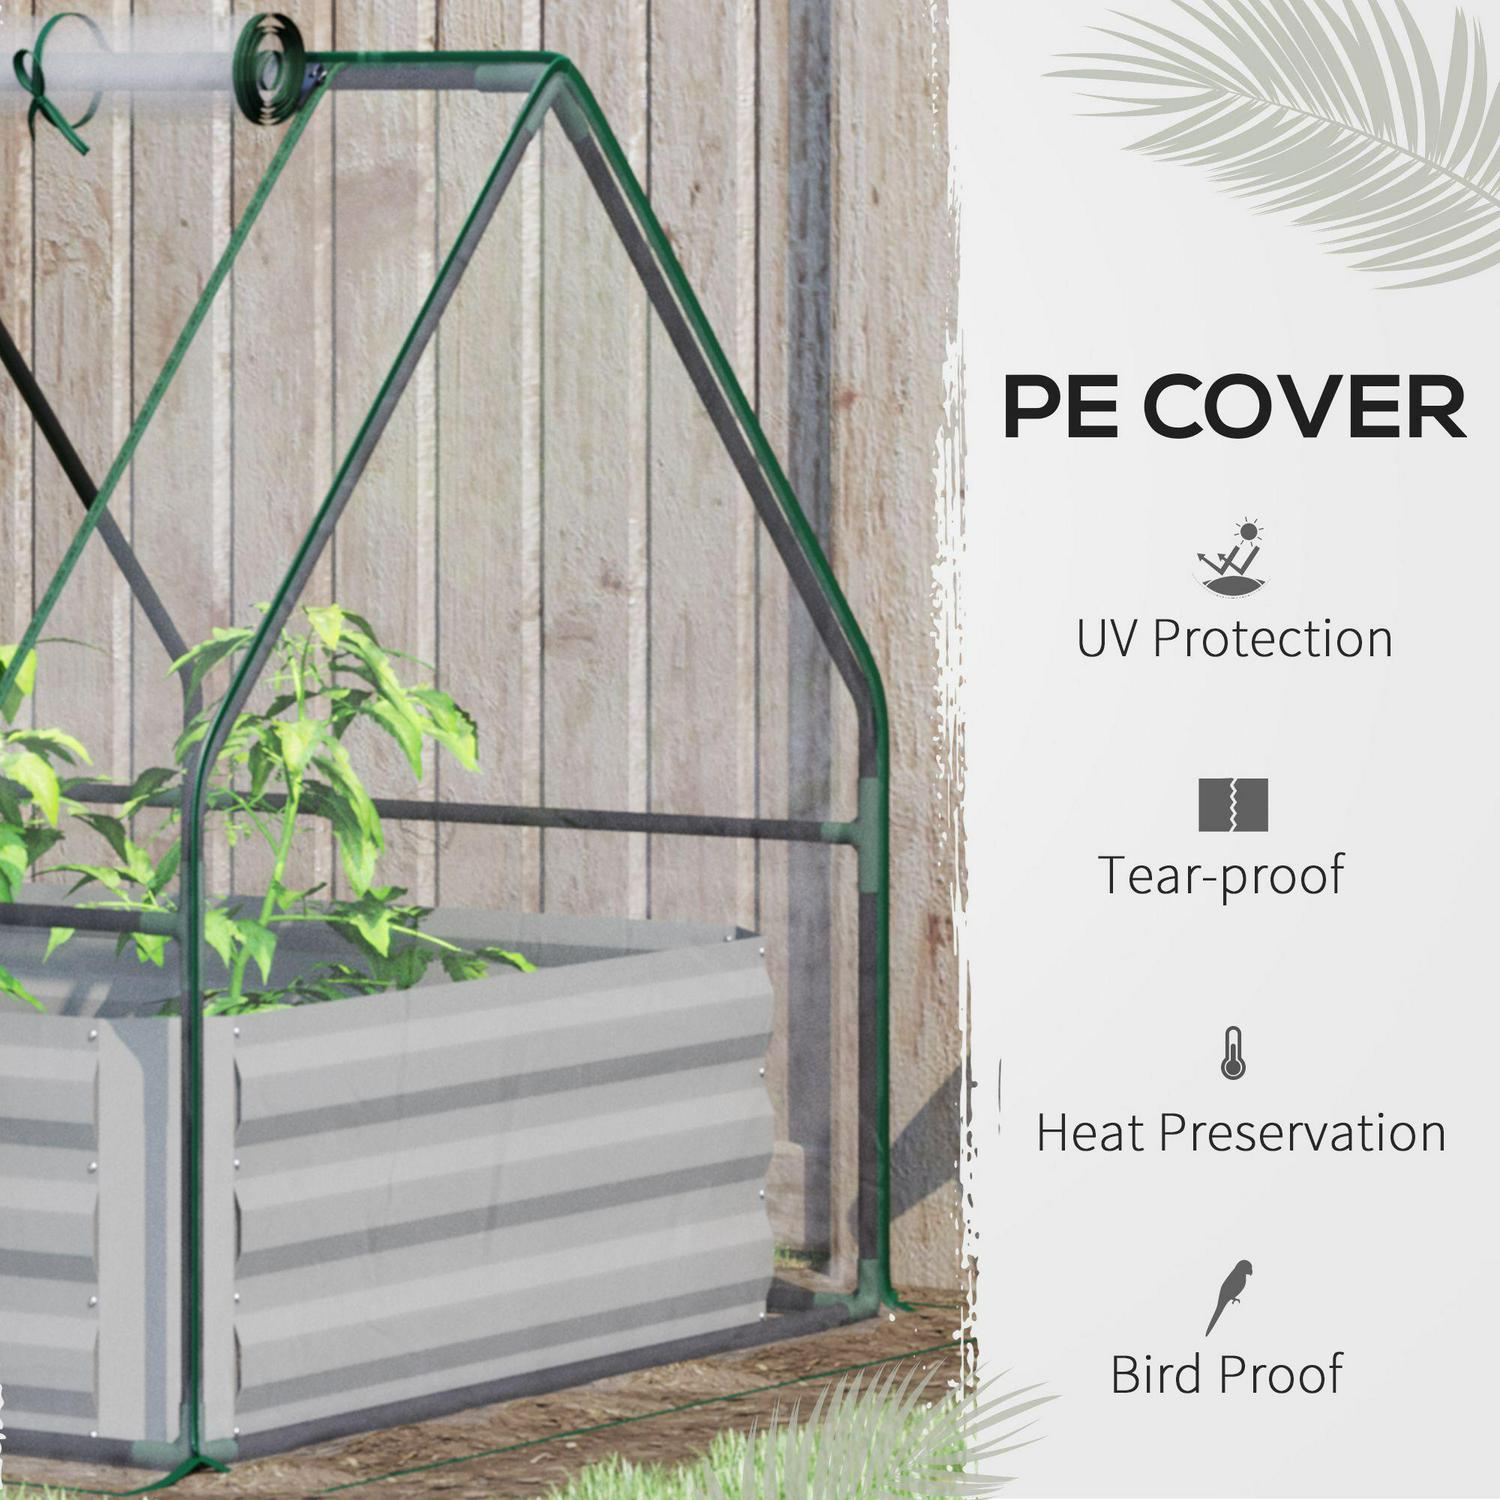 Steel Raised Garden Planter Box Kit With Greenhouse, For Dual Clear